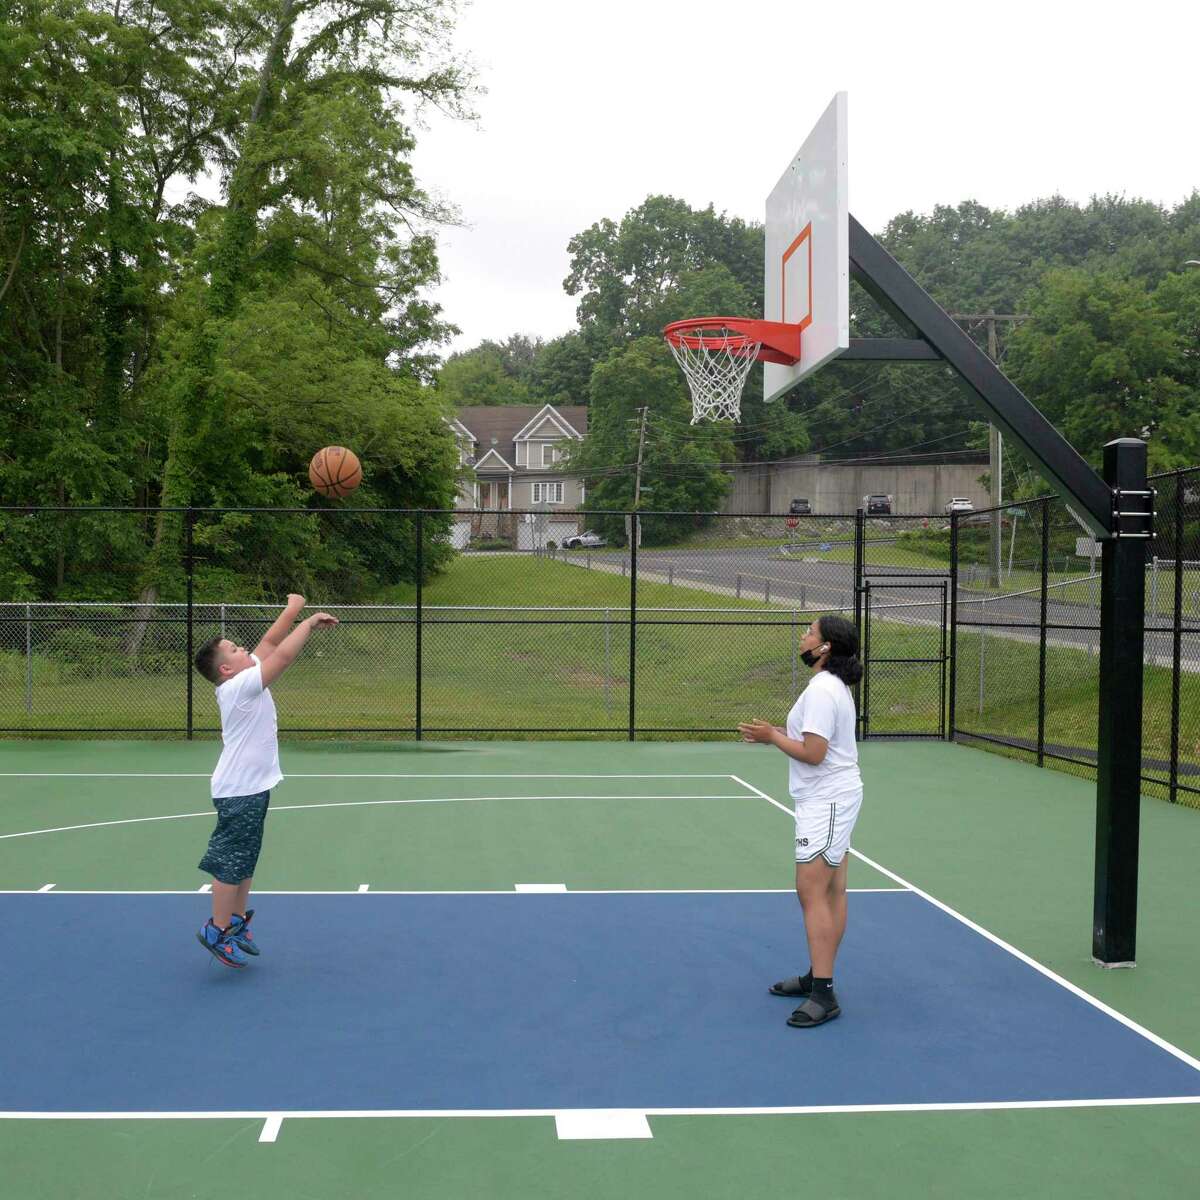 Xiomara Sotro, 15, plays basketball in the rain with her brother Eddie Villalongo, 8, on the new court in Rogers Park. Wednesday, June 22, 2022, Danbury, Conn.